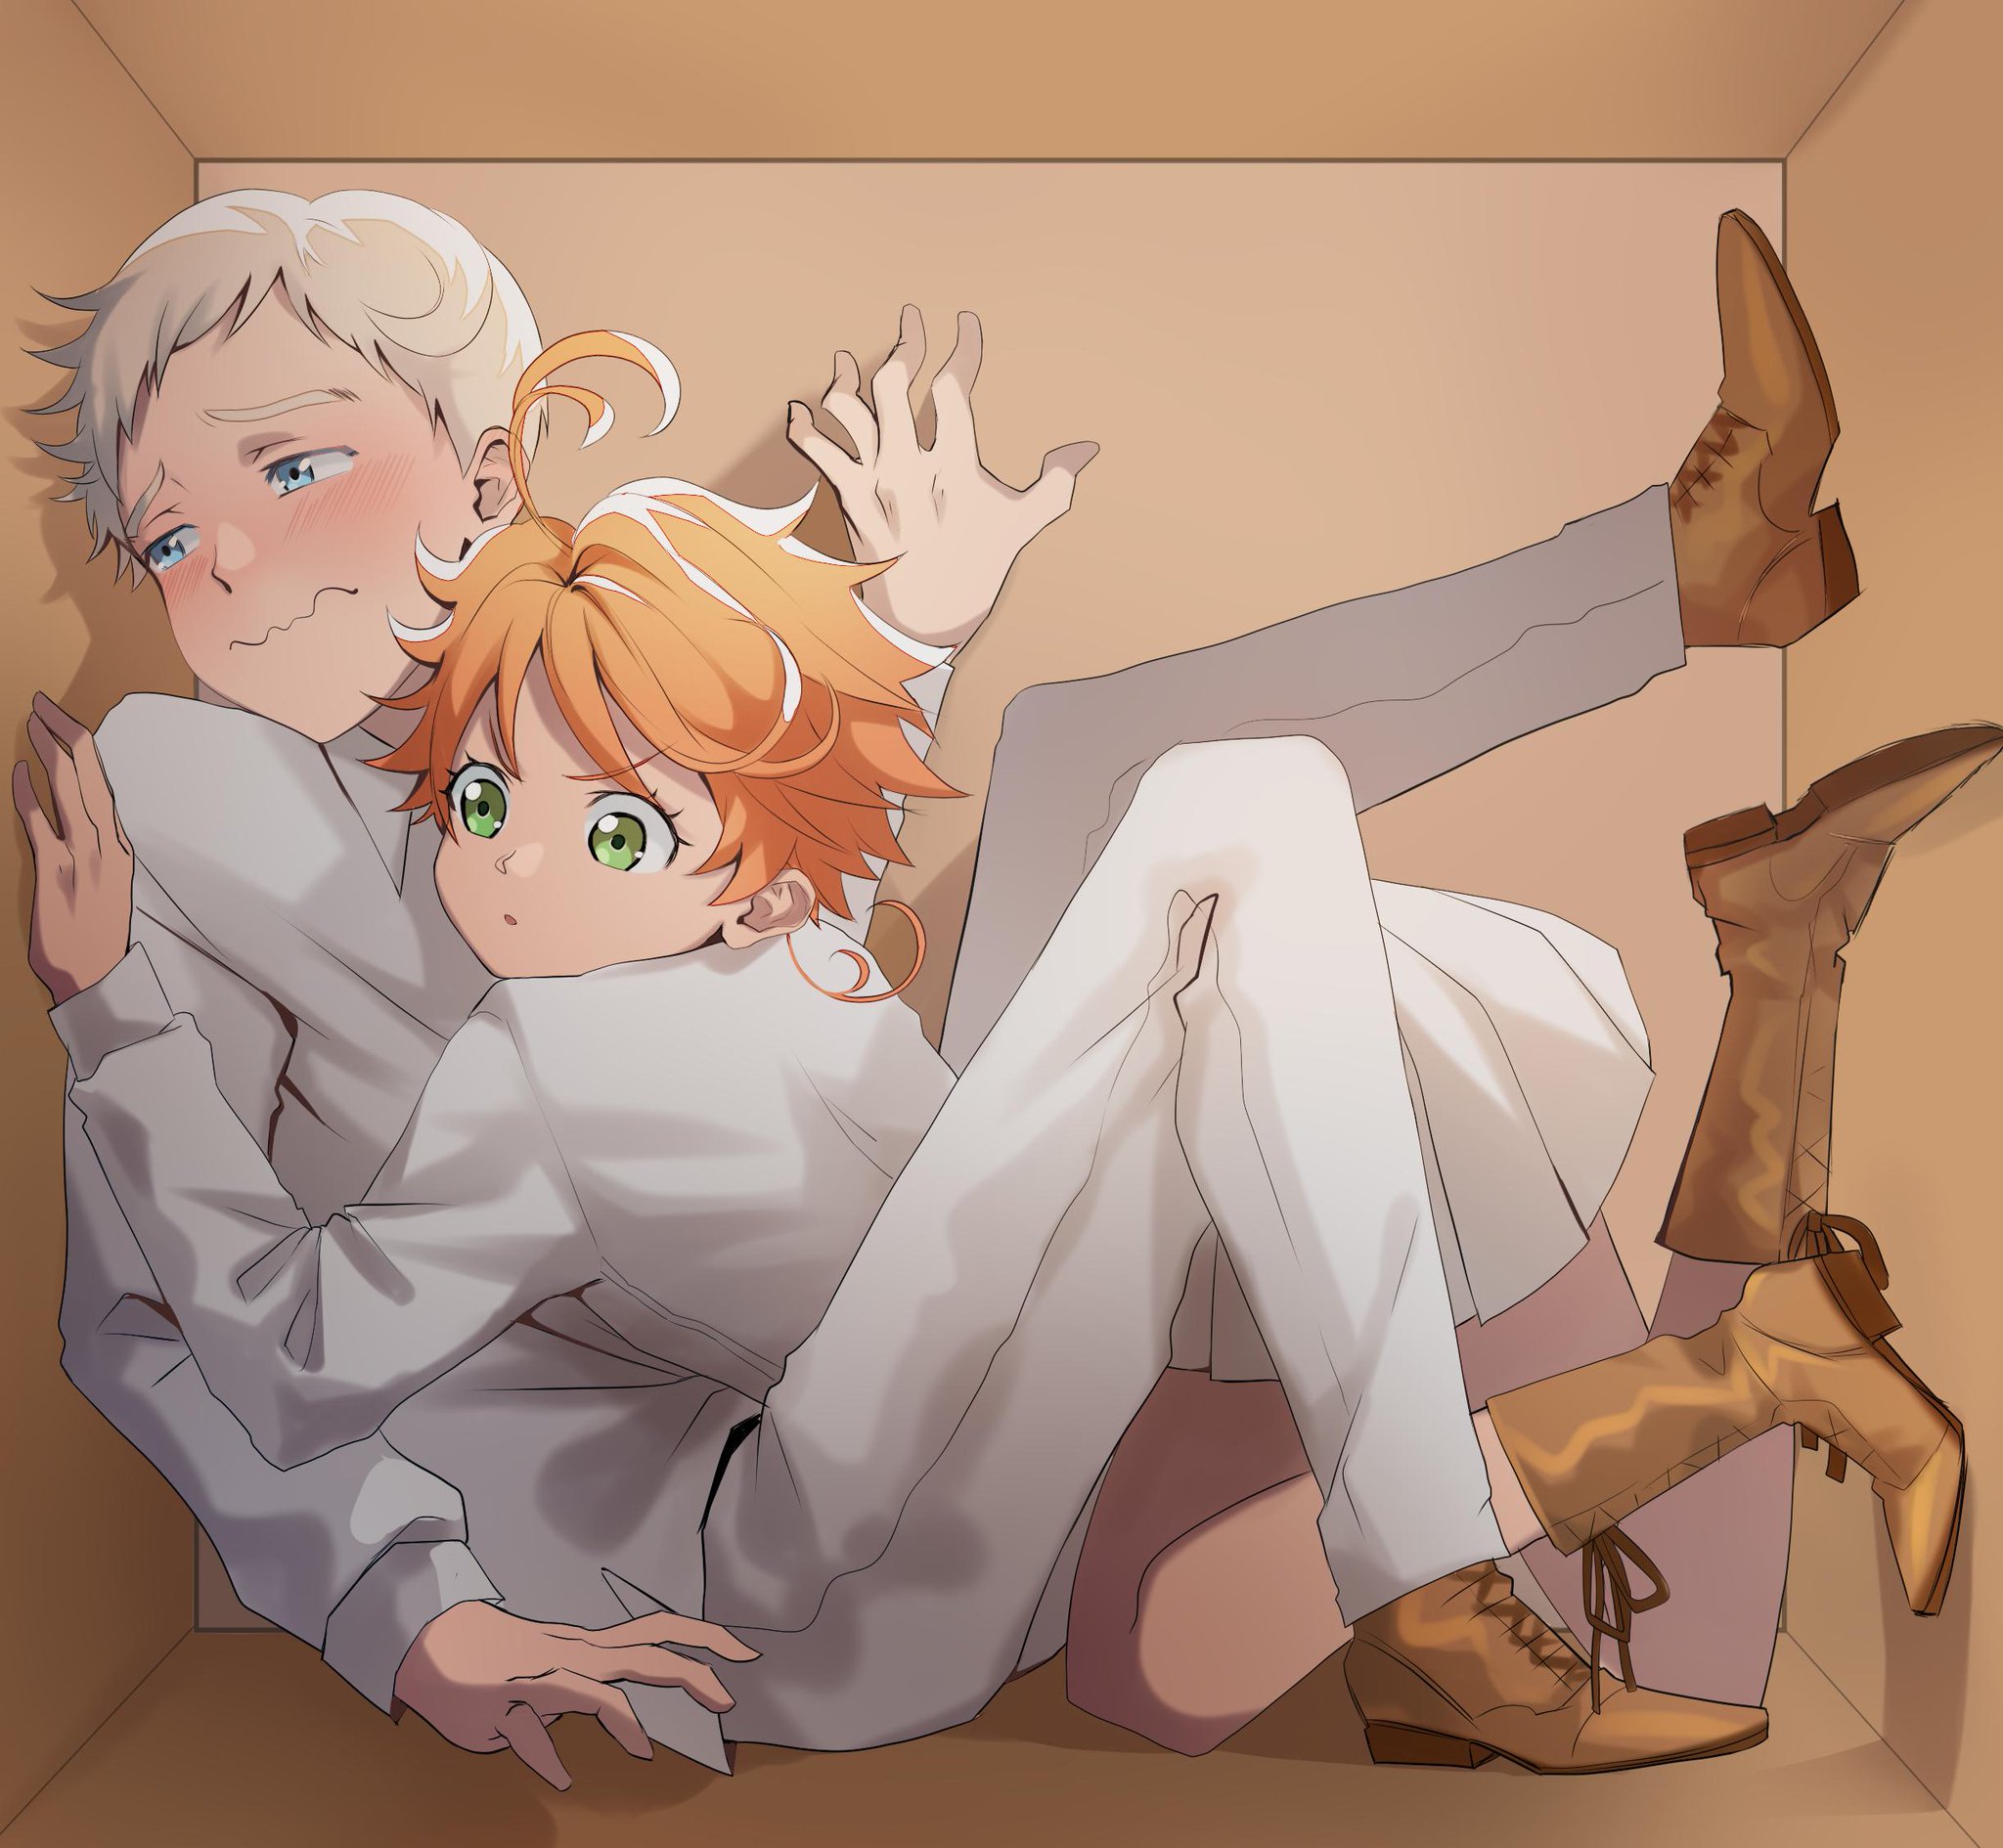 “I ship these two so hard and shy Norman best Norman ♥ Trapped in a box thi...